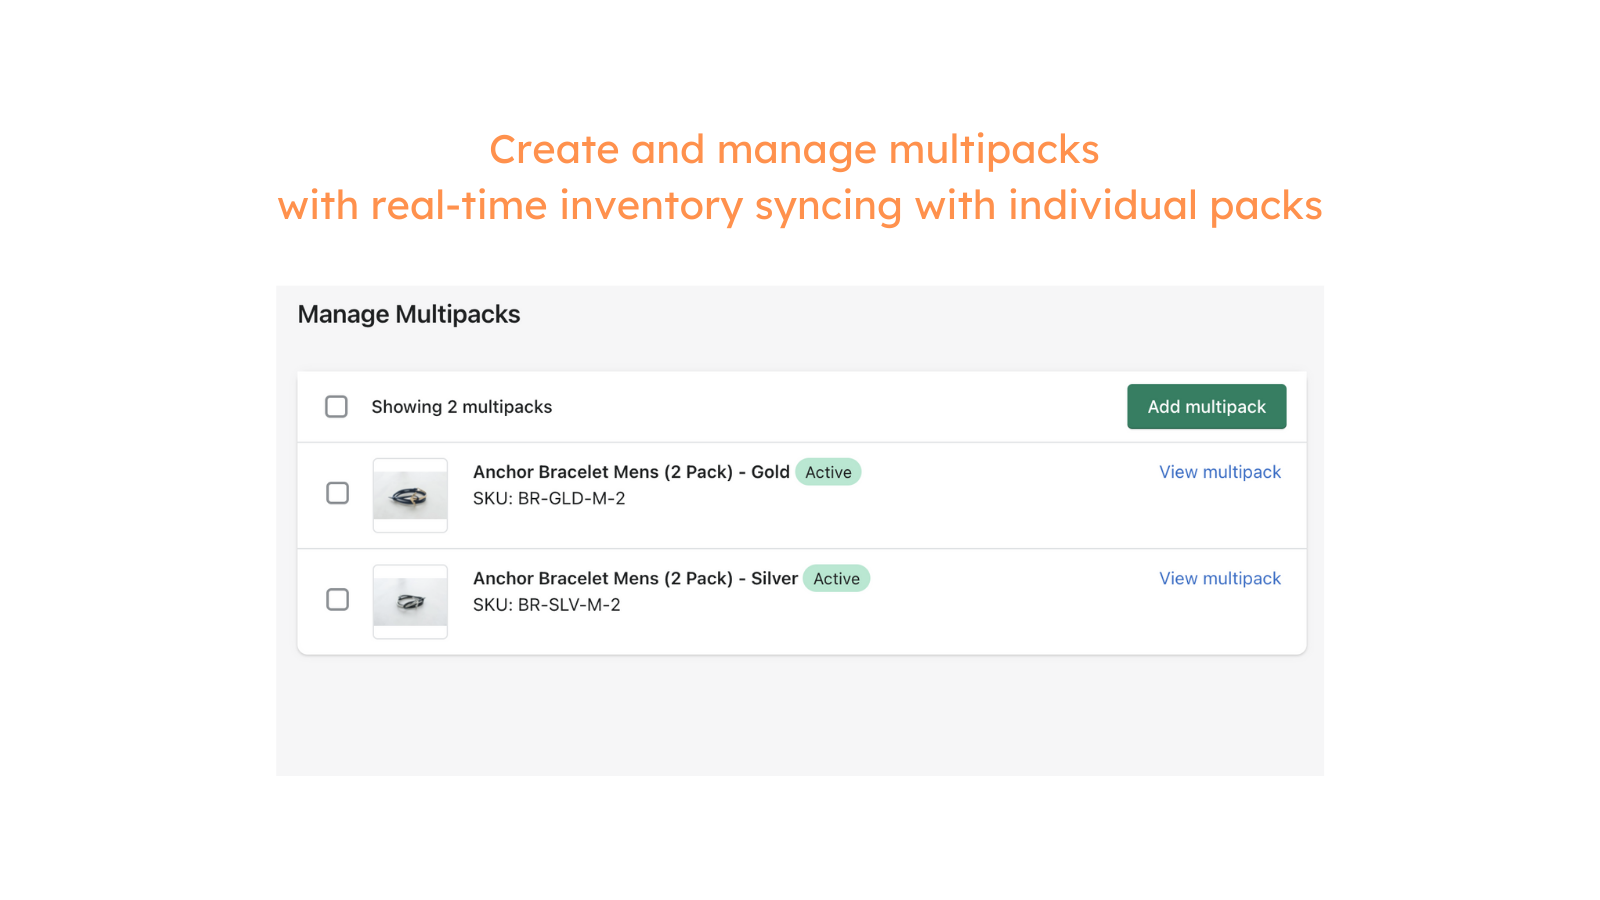 Create and manage multipacks with real-time inventory syncing